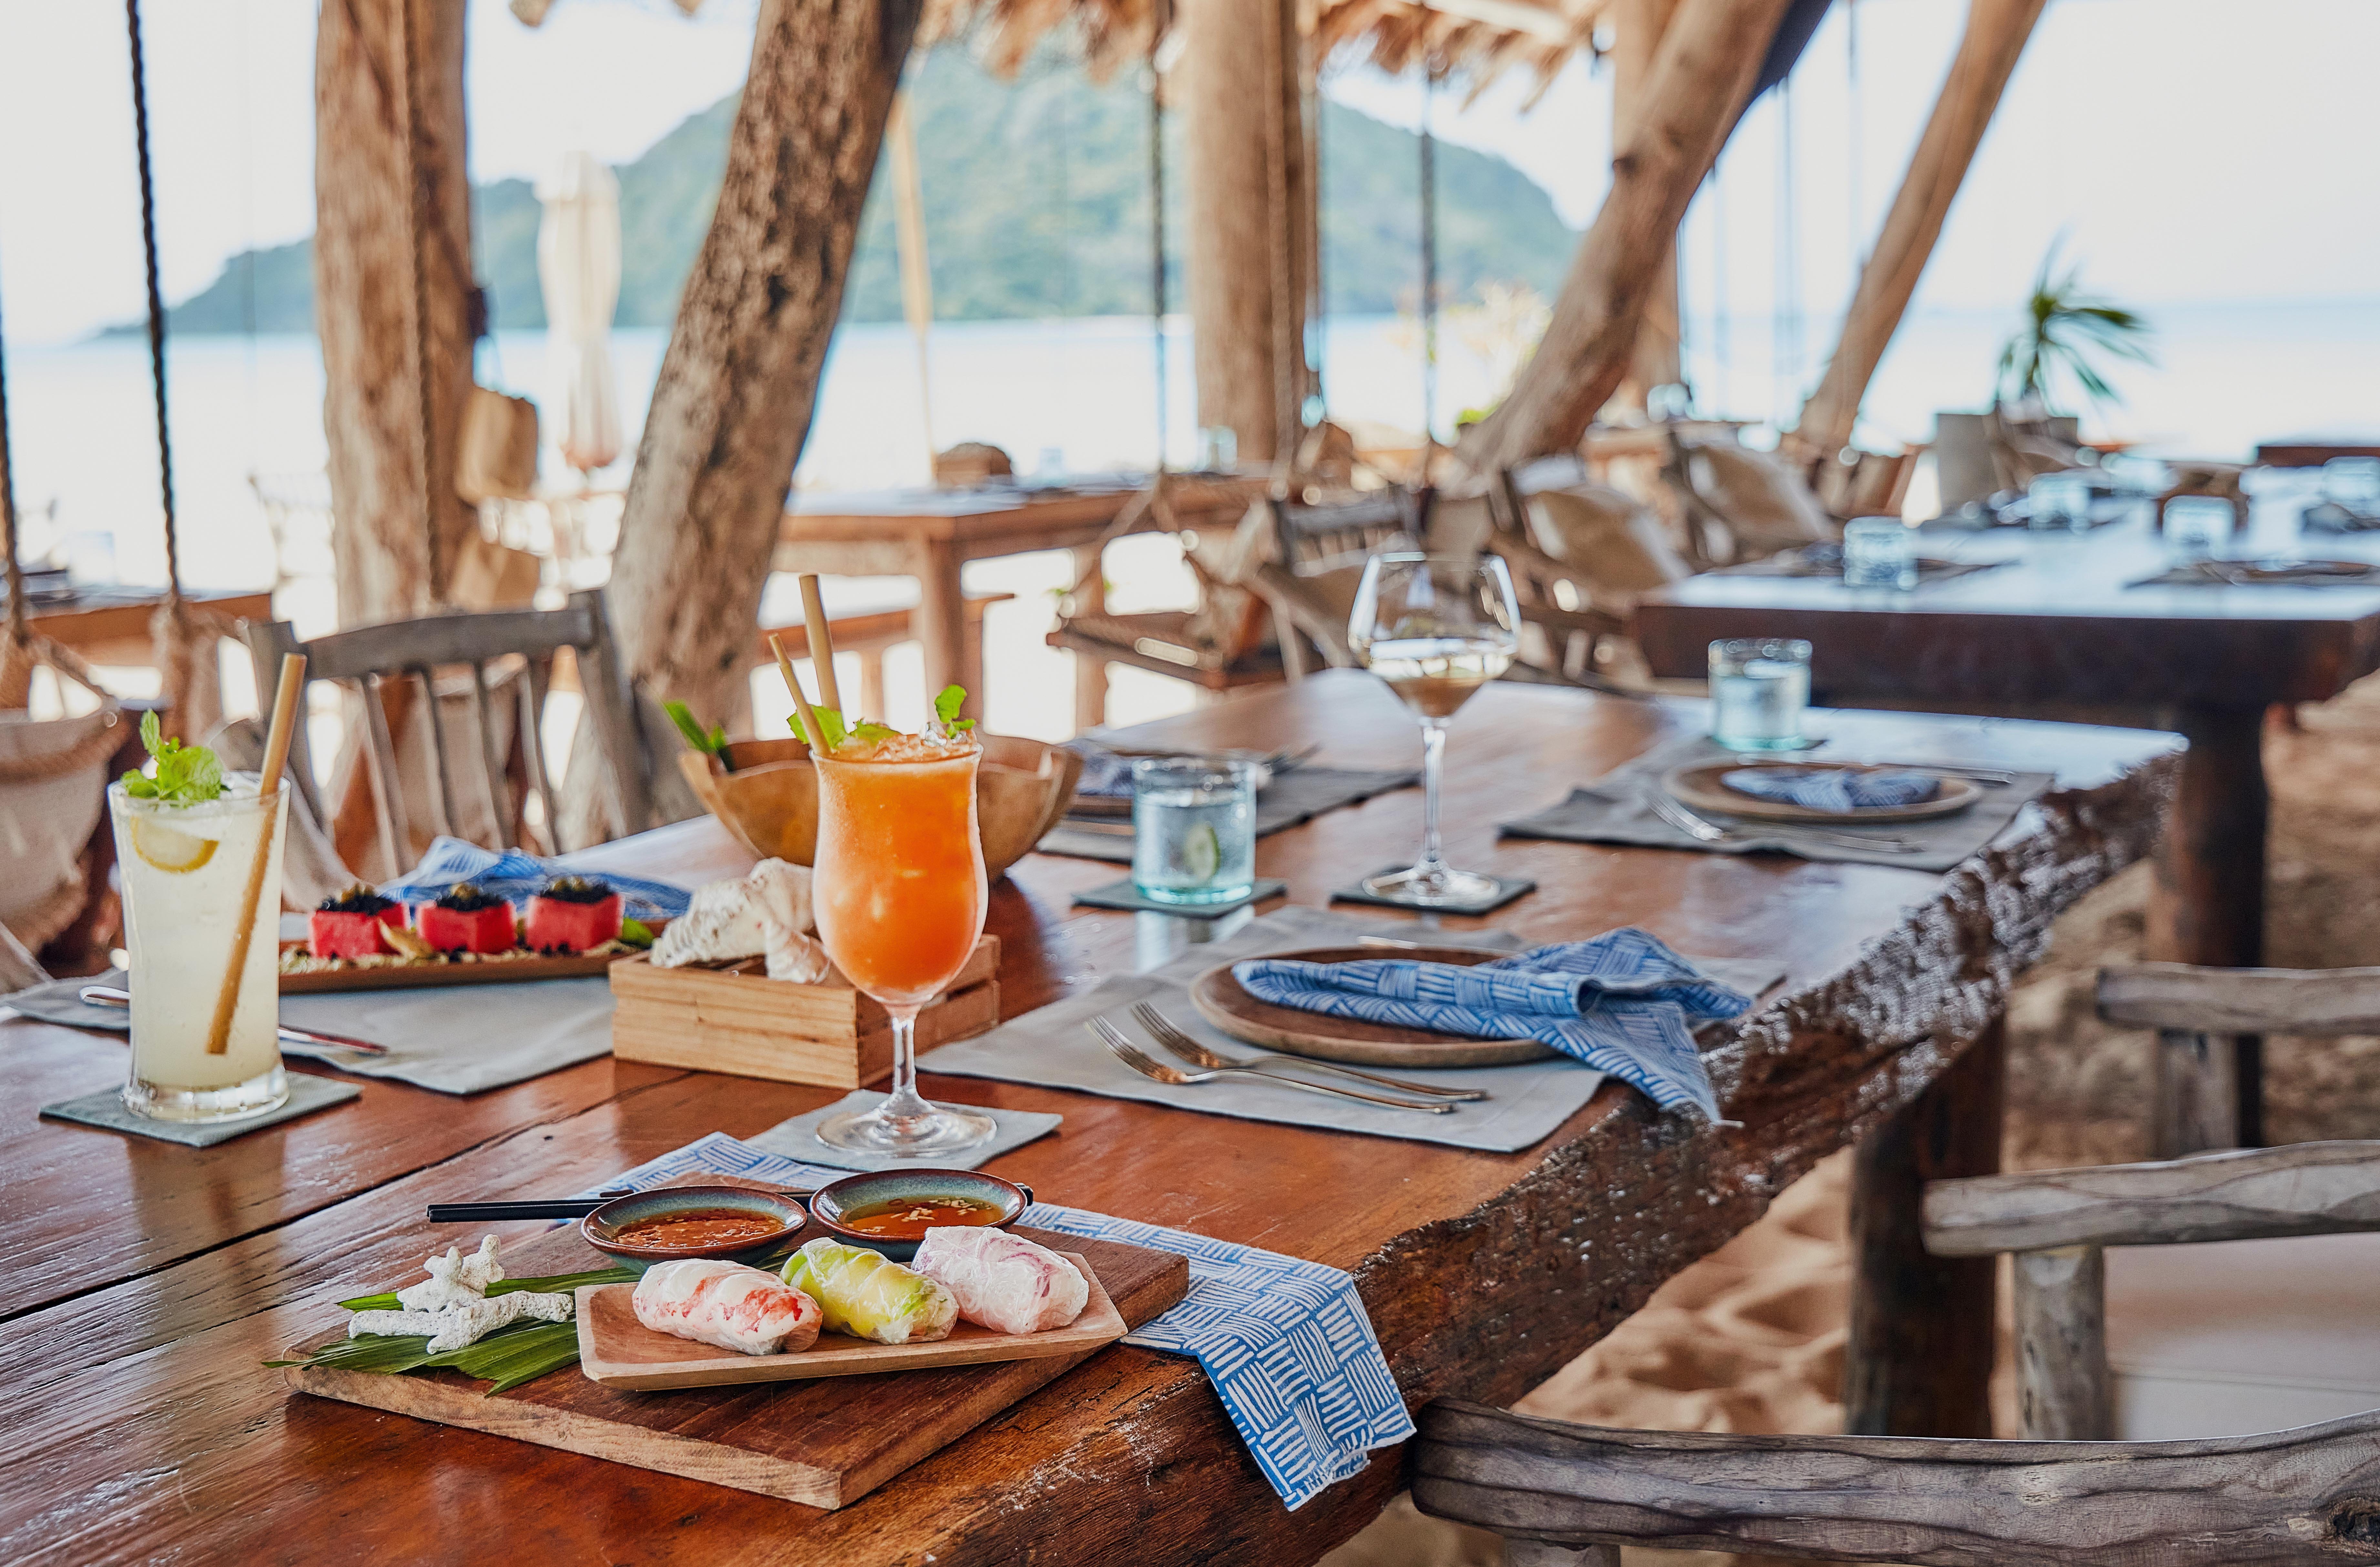 boat-house-lunch-summer-rolls-juices-table-settinga (1)